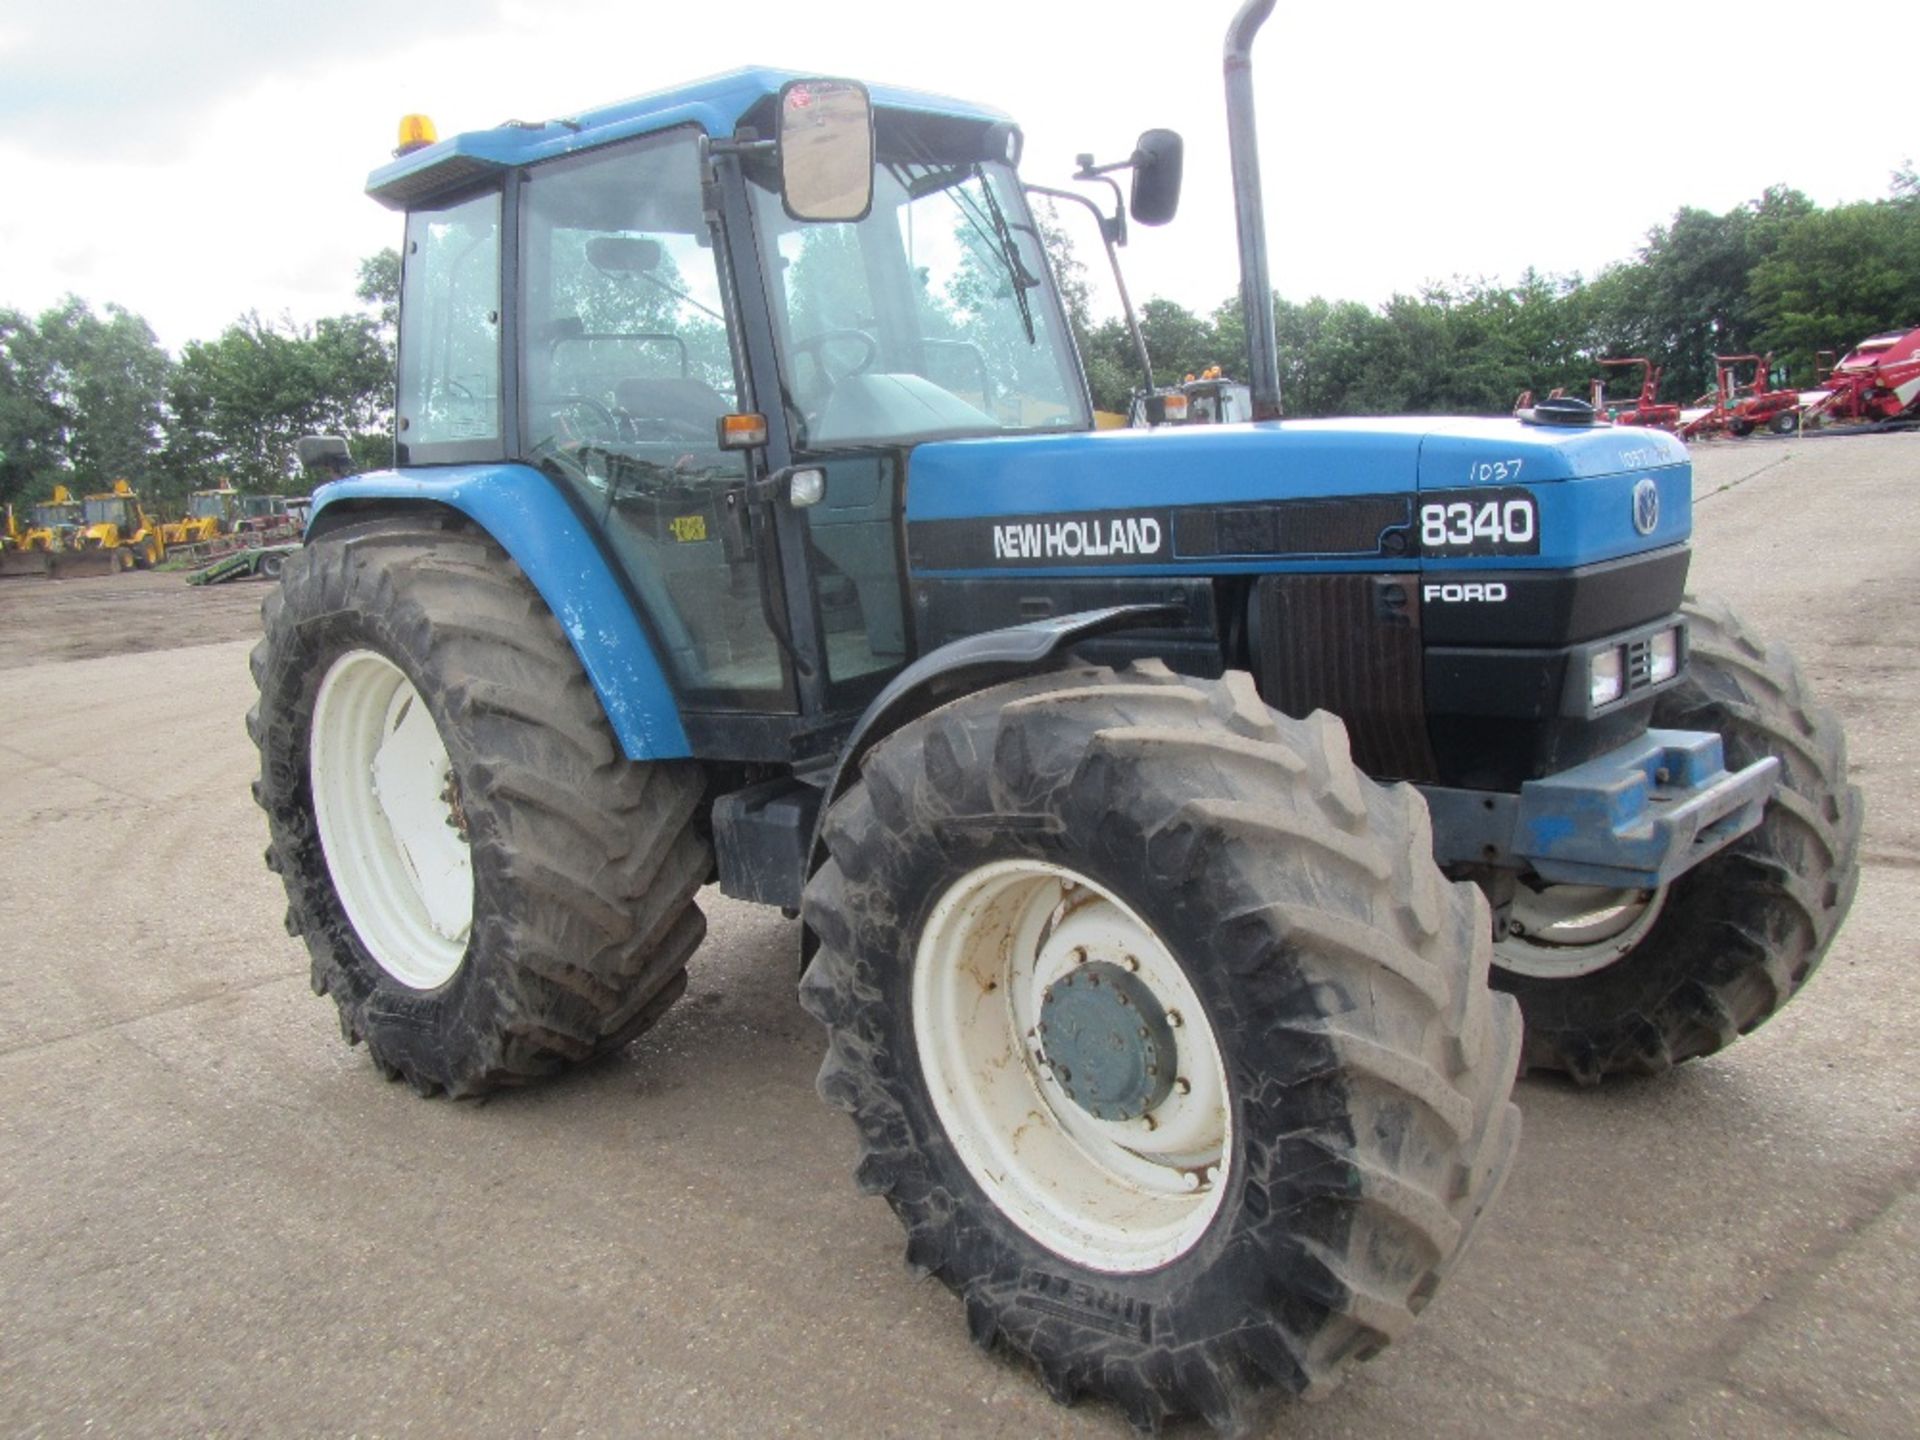 New Holland 8340 SLE 4wd Tractor. Reg. No. N243 SCN Ser. No. 025324B - Image 3 of 20